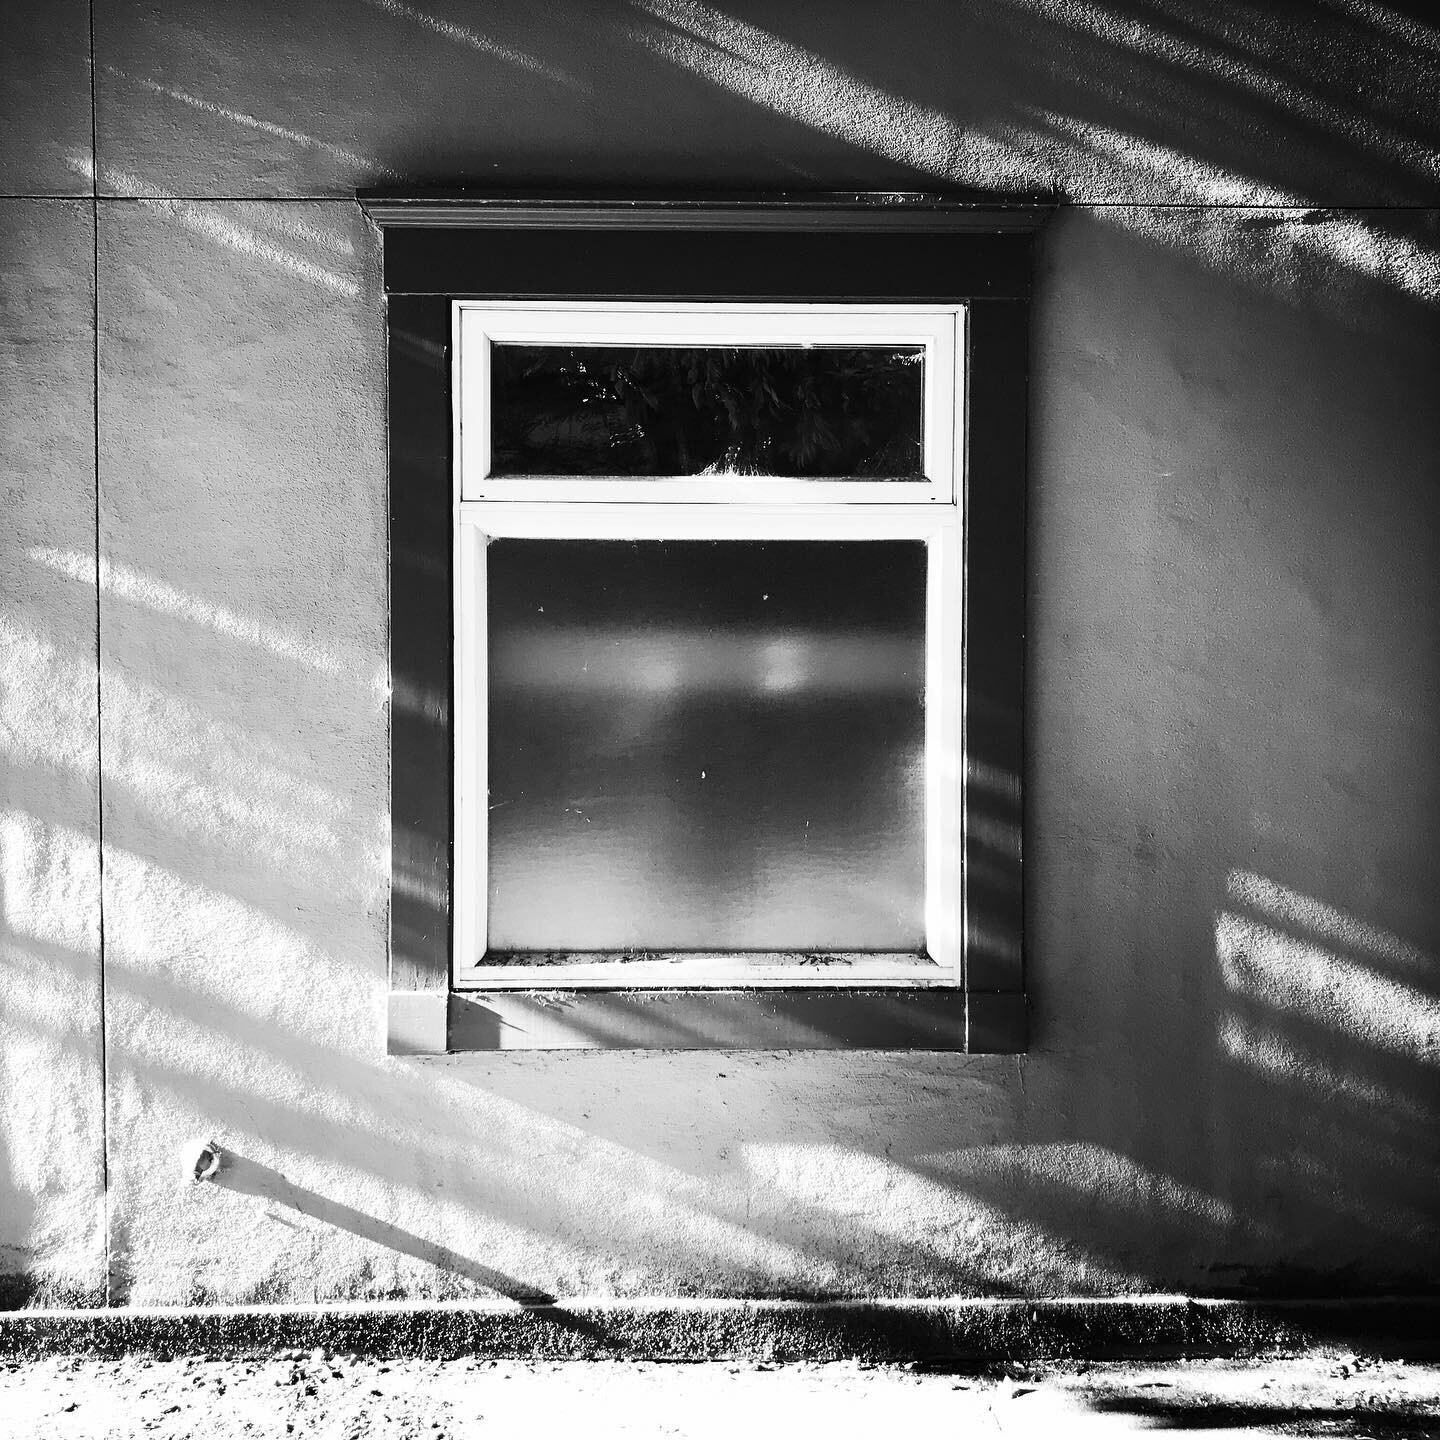 NW Thurman Street, Afternoon. #bwphotograpy #blackandwhite #streetphotography #shadows #summer #window